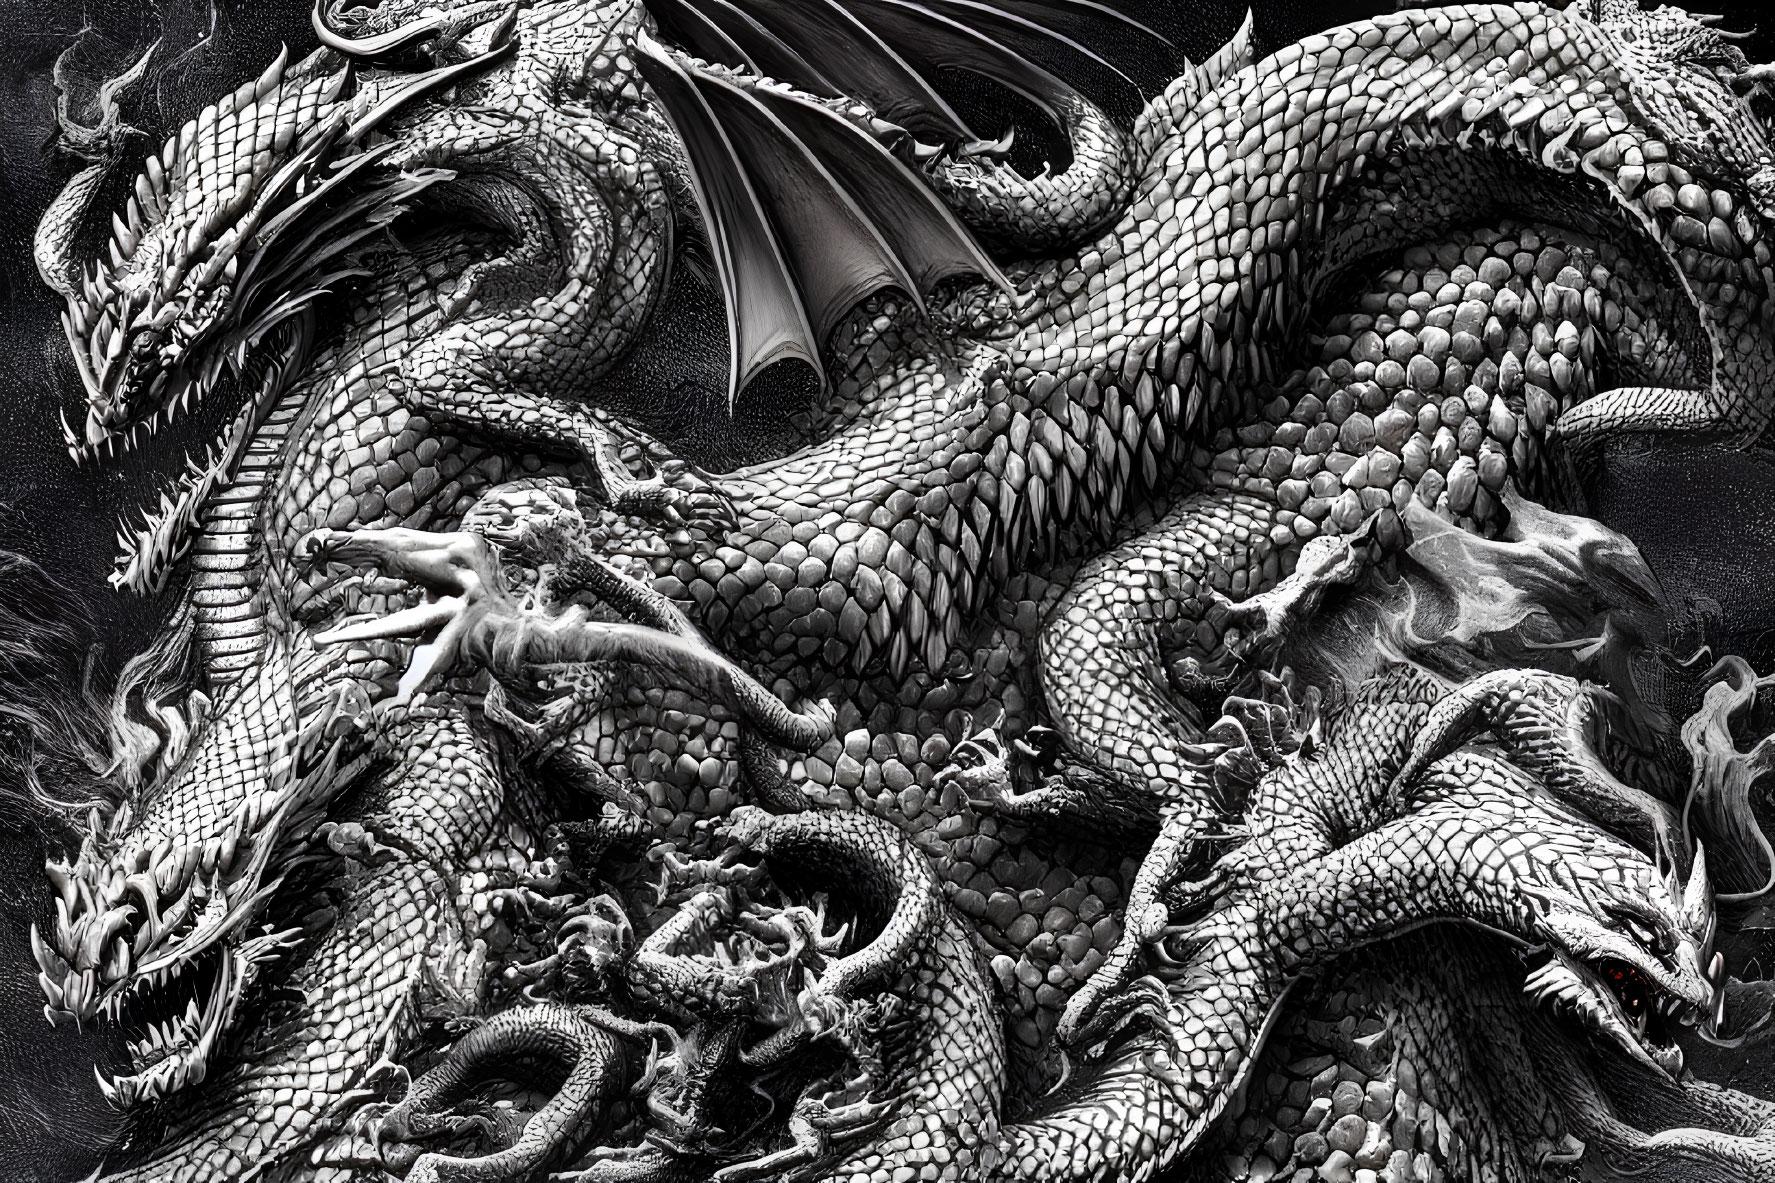 Detailed Monochrome Dragon Illustration with Intricate Scales and Intense Gaze